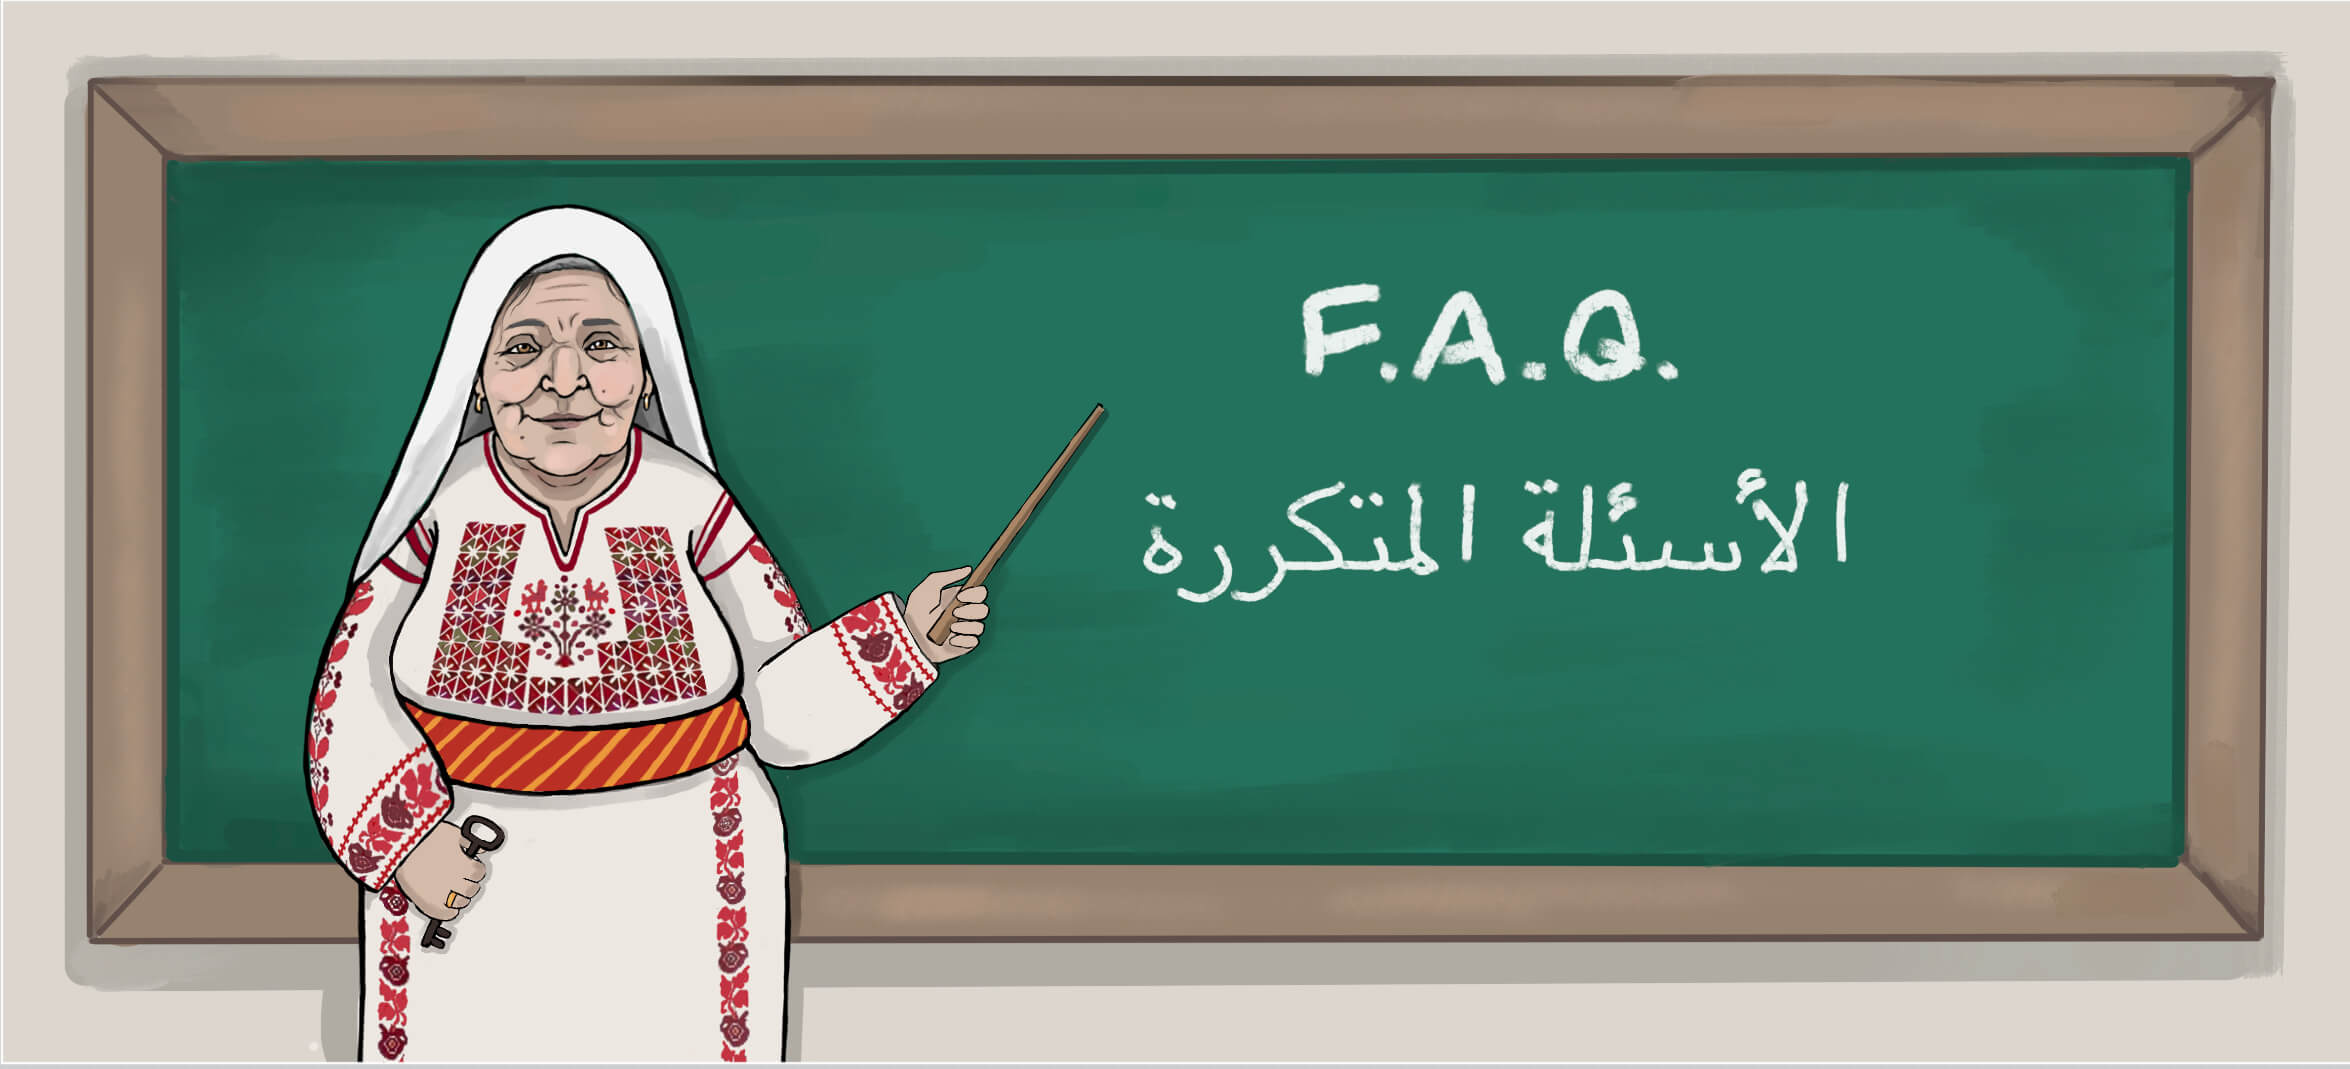 Palestine FAQ. Image of an old Palestinian woman in traditional garb, standing in front of a blackboard which has the words "F.A.Q." written on it in Arabic and English.